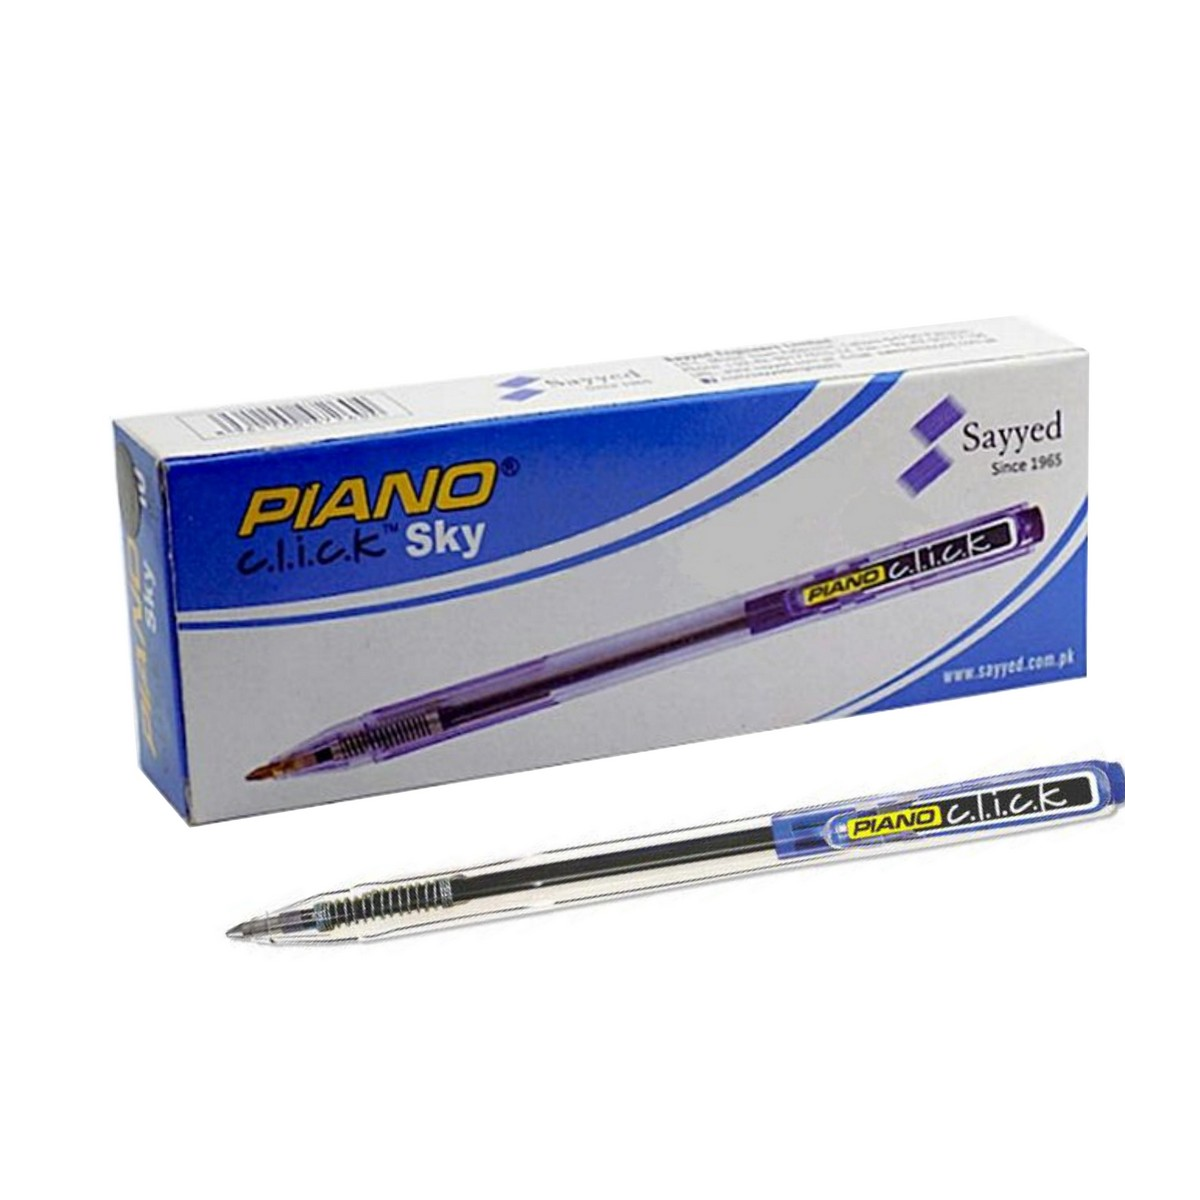 Piano Ball Point Click Sky Pack Of 10